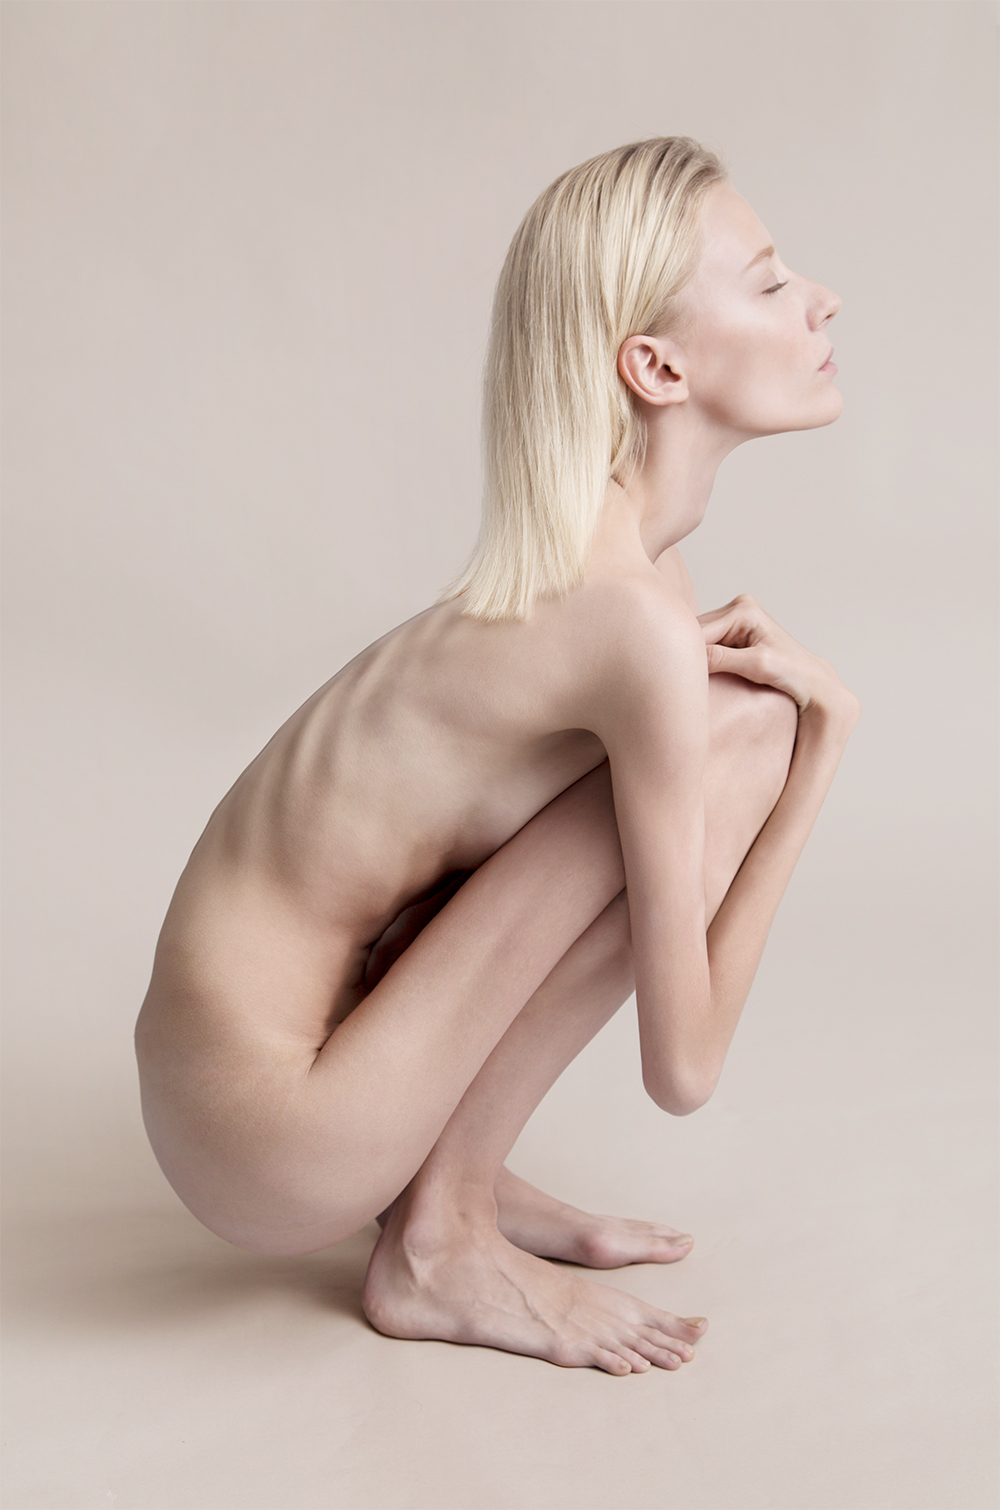 Melissa initially felt awkward photographing naked models, but the end result is a series of thought provoking images. 